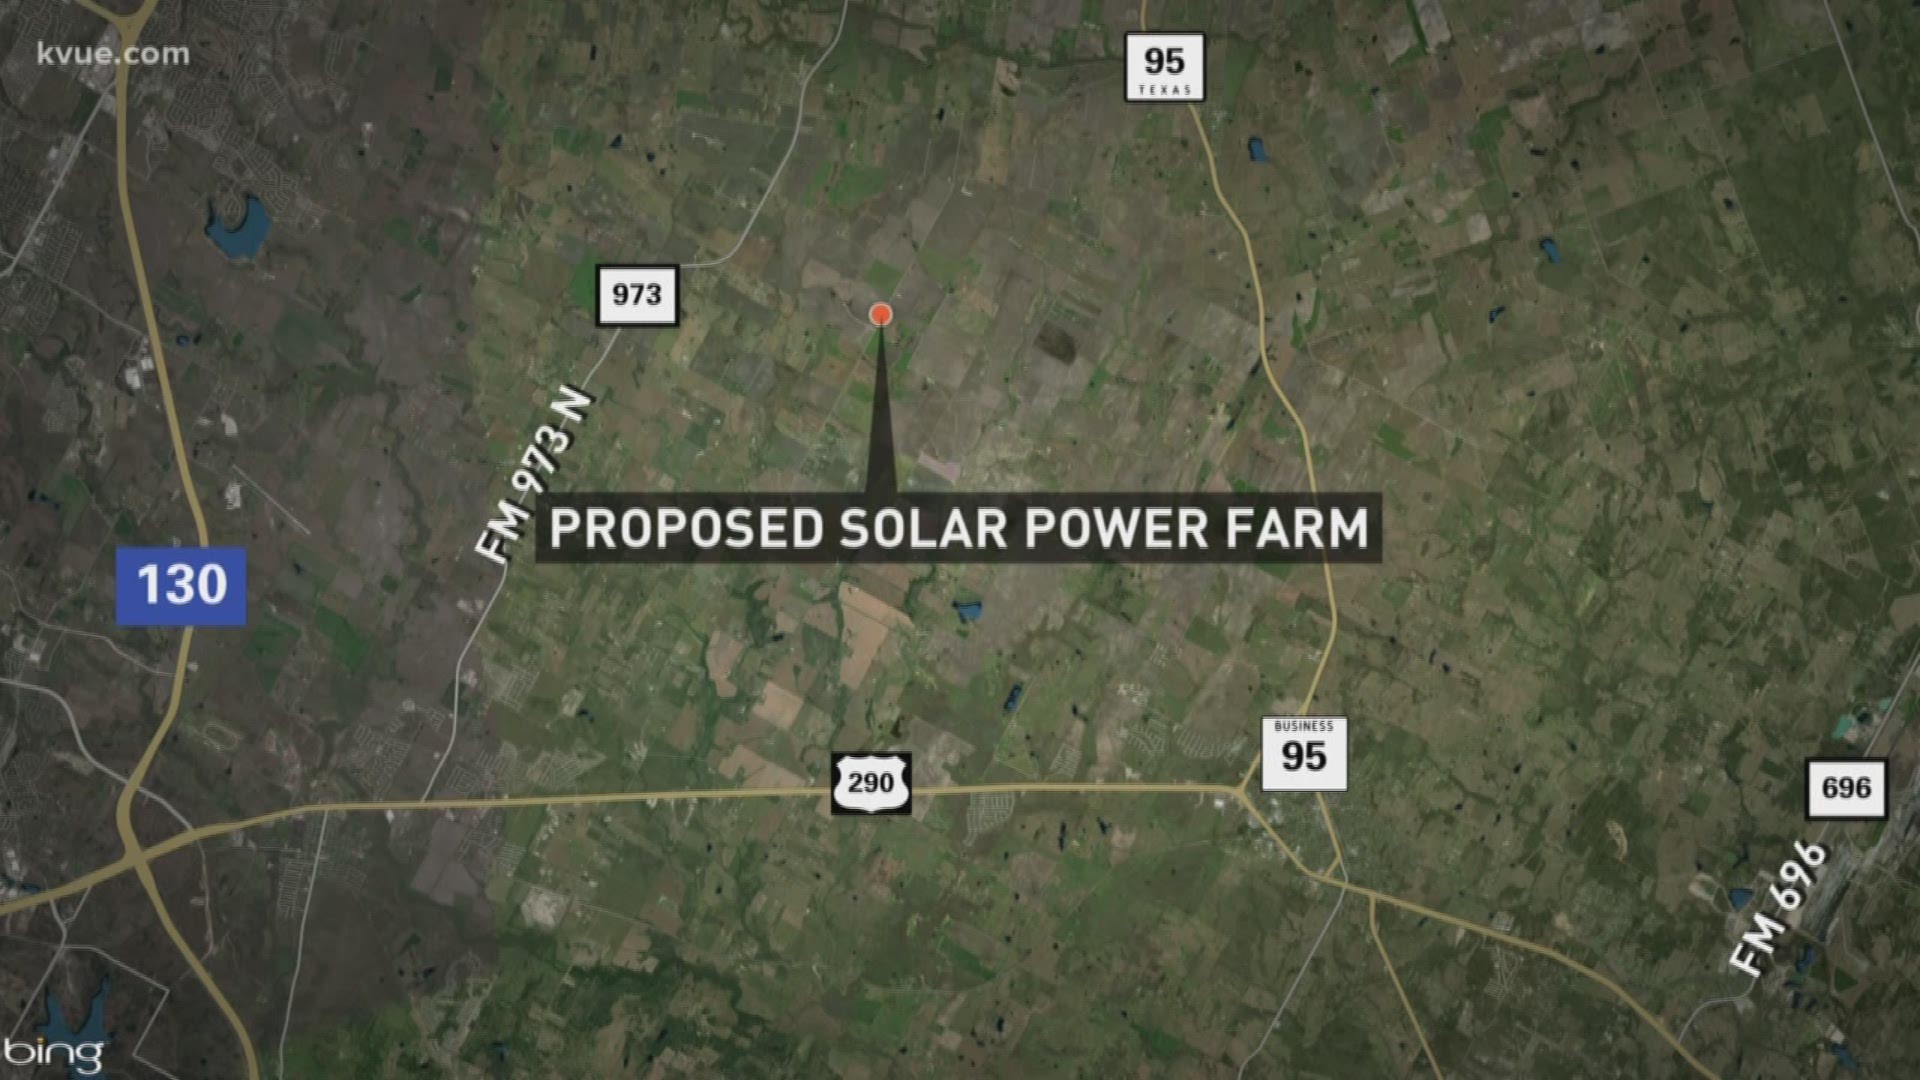 Thousands more homes could be powered by solar energy in Pflugerville, Texas.